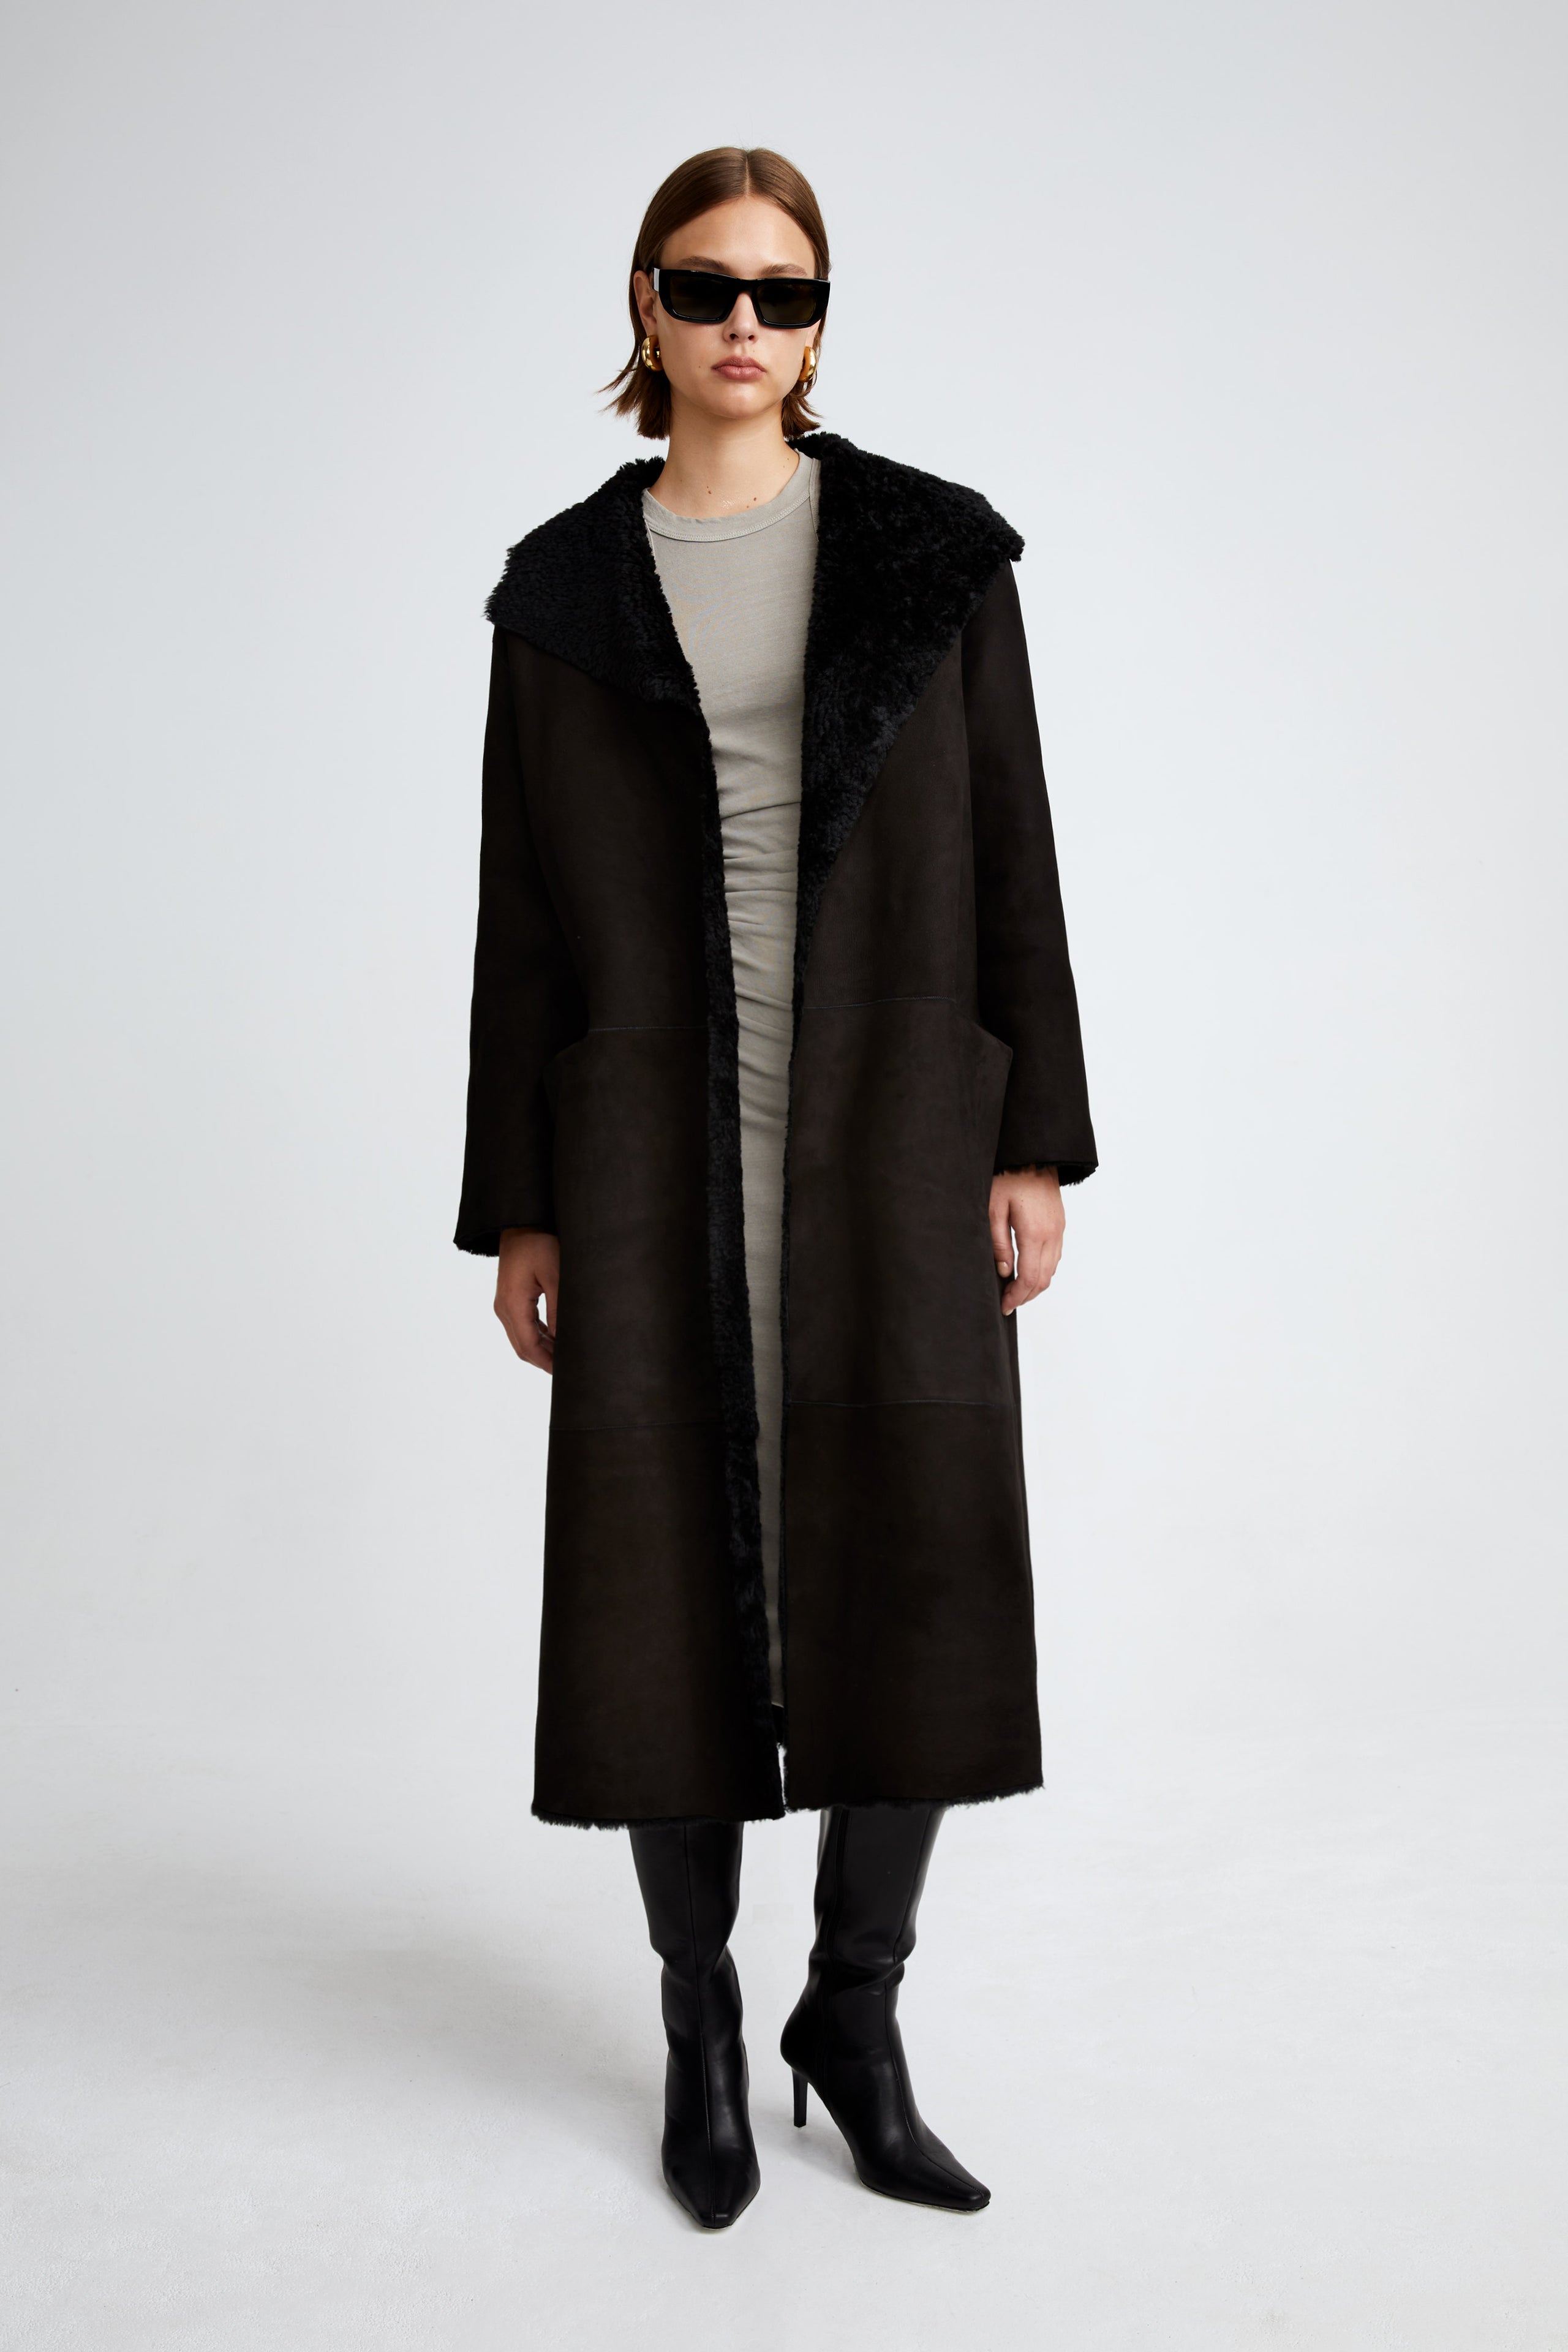 Model is wearing the Birthday Coat Black Draped Shearling Coat Front